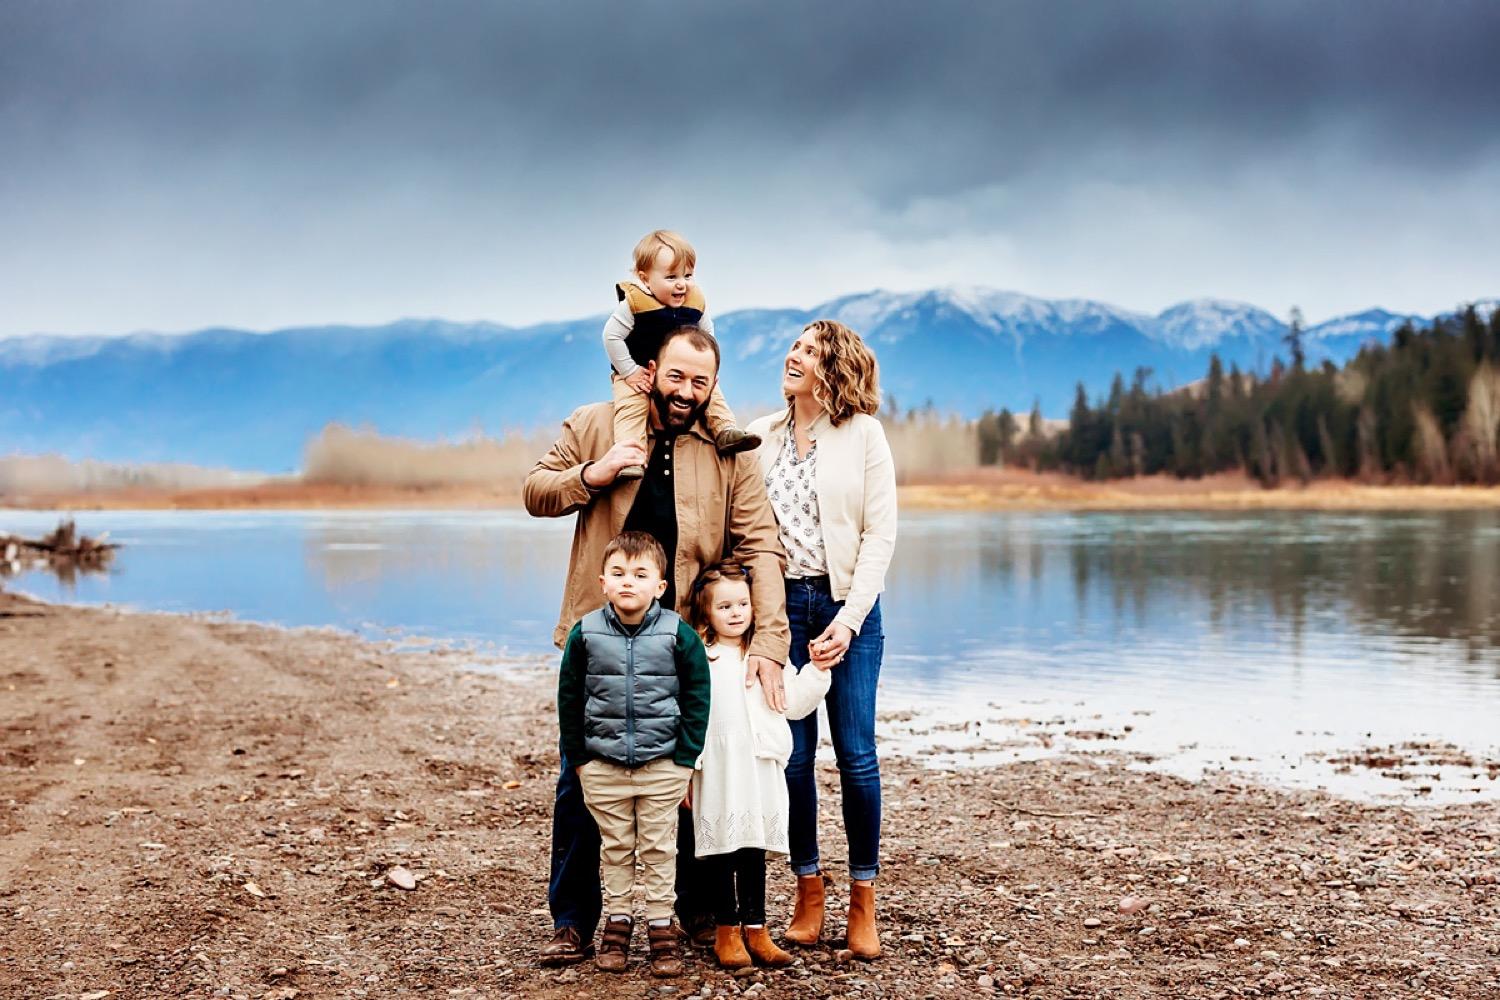 Kalispell family portrait photography by Kalispell family and maternity photographer Valerie Clement Photography